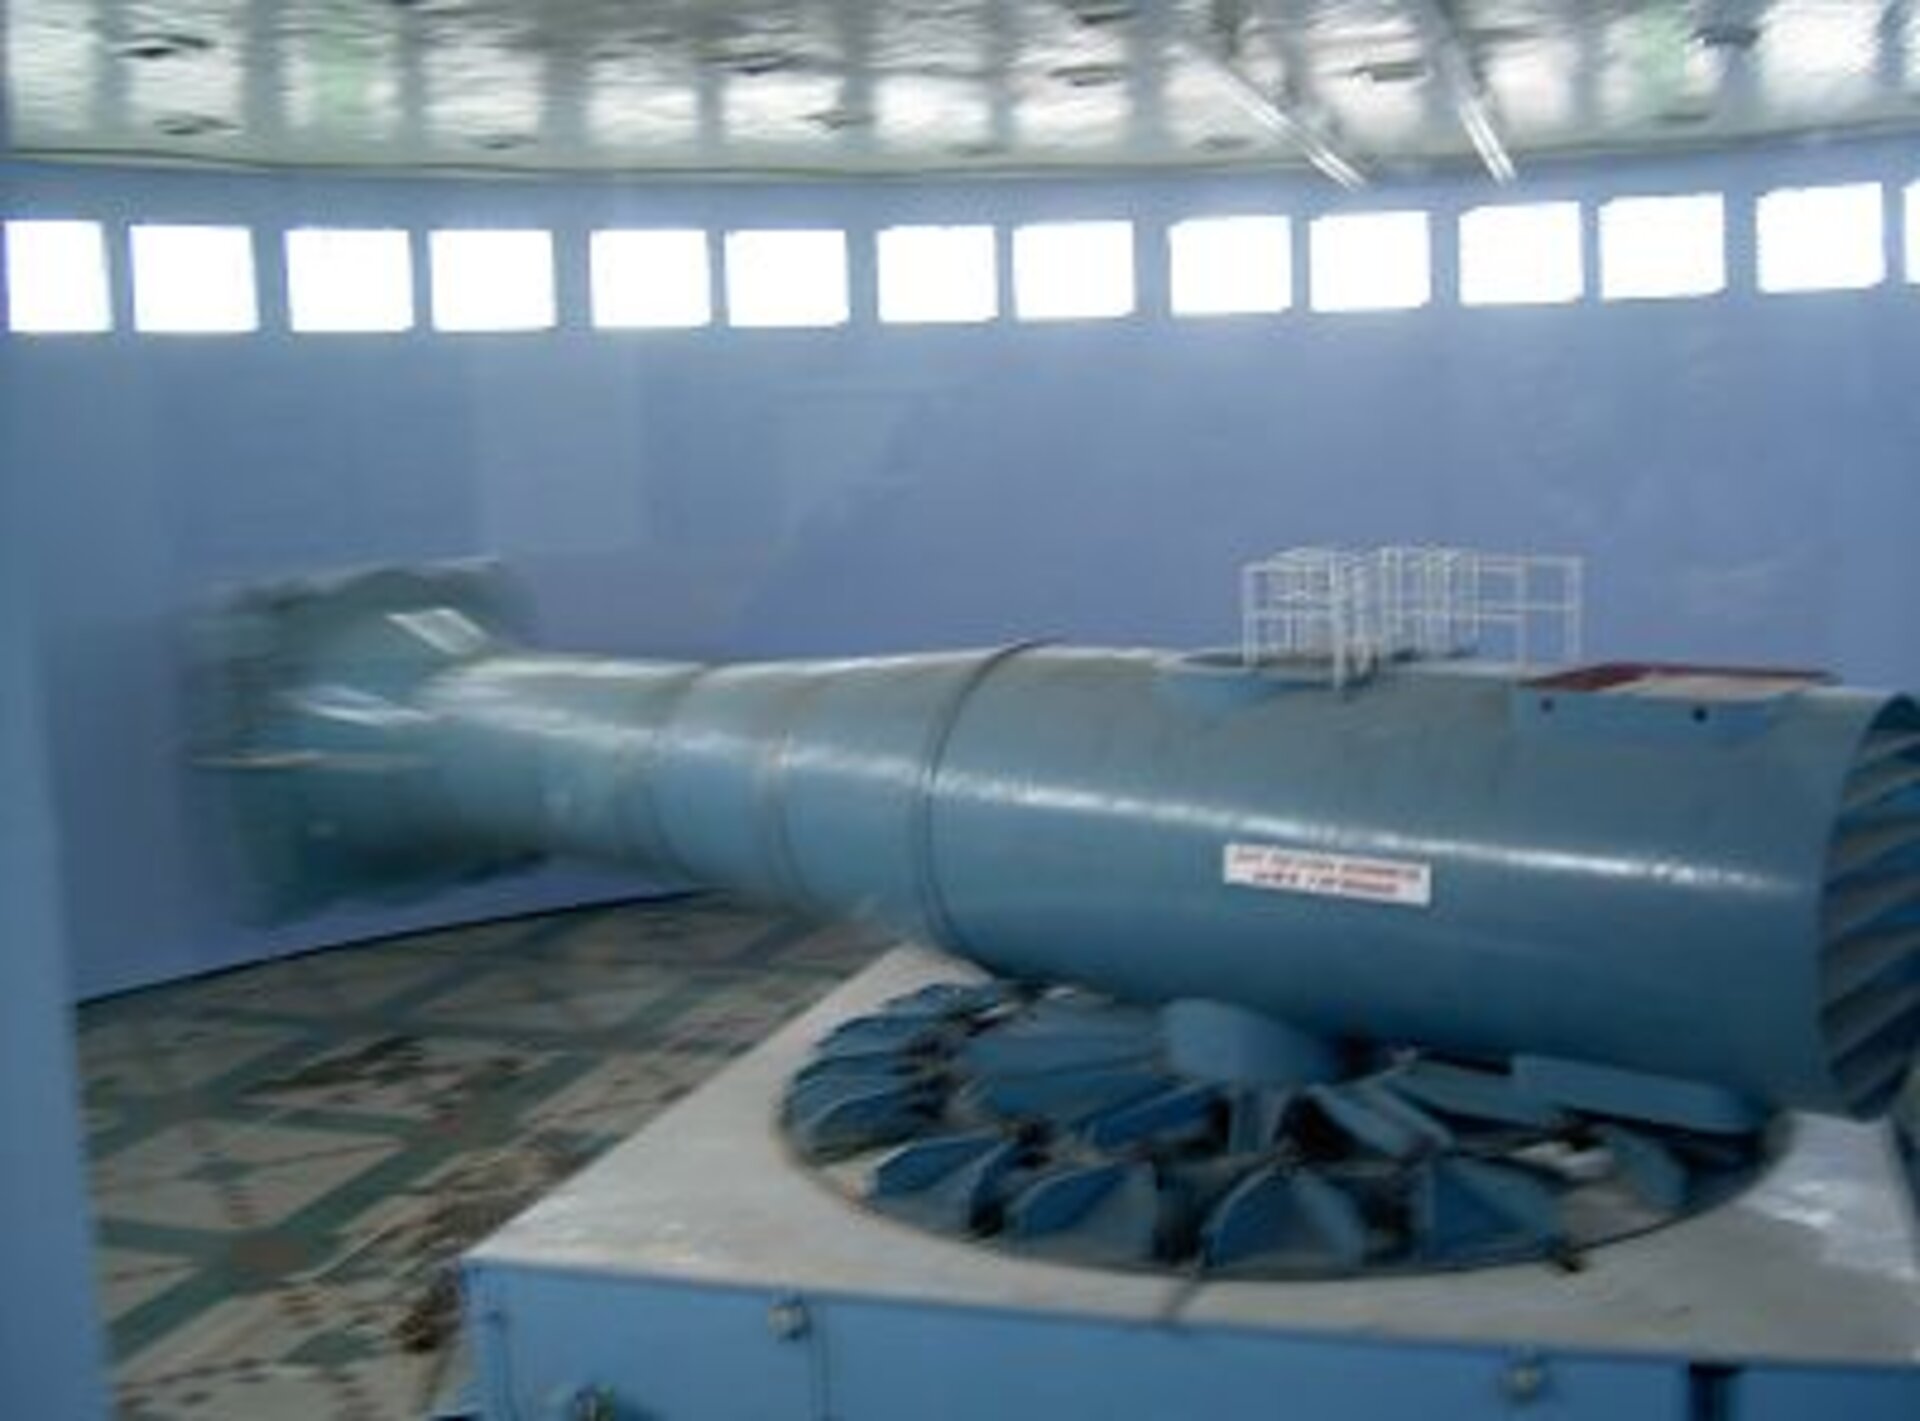 Centrifuge in operation